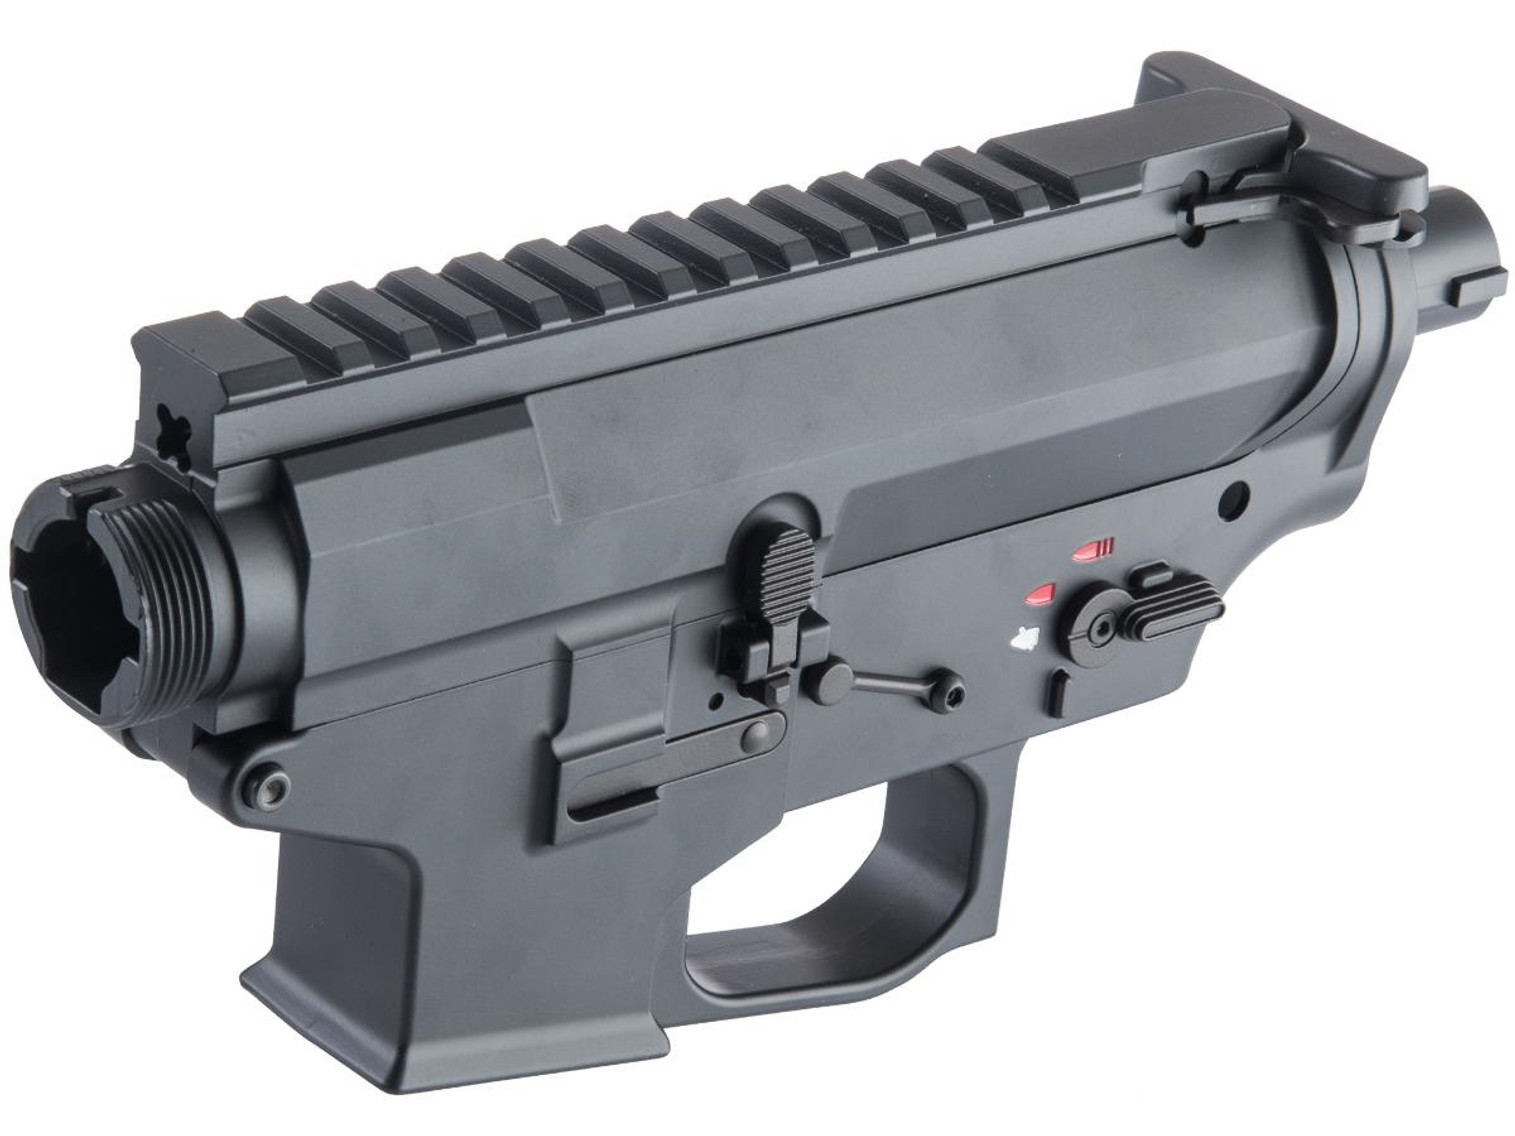 CYMA Platinum "Rapid Strike" Receiver Group for 9mm PCC Airsoft AEGs
